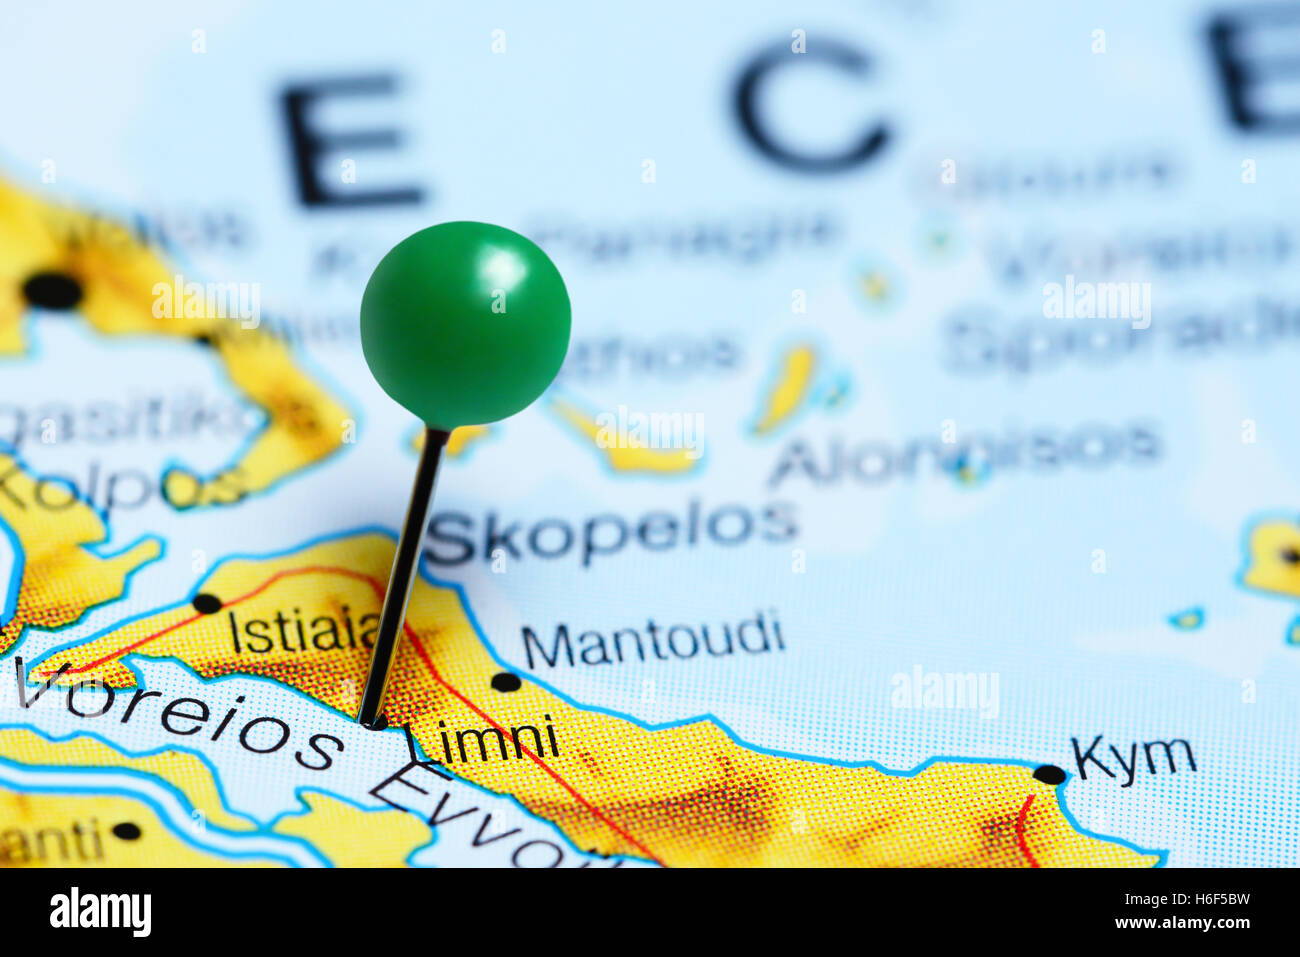 Limni pinned on a map of Greece Stock Photo